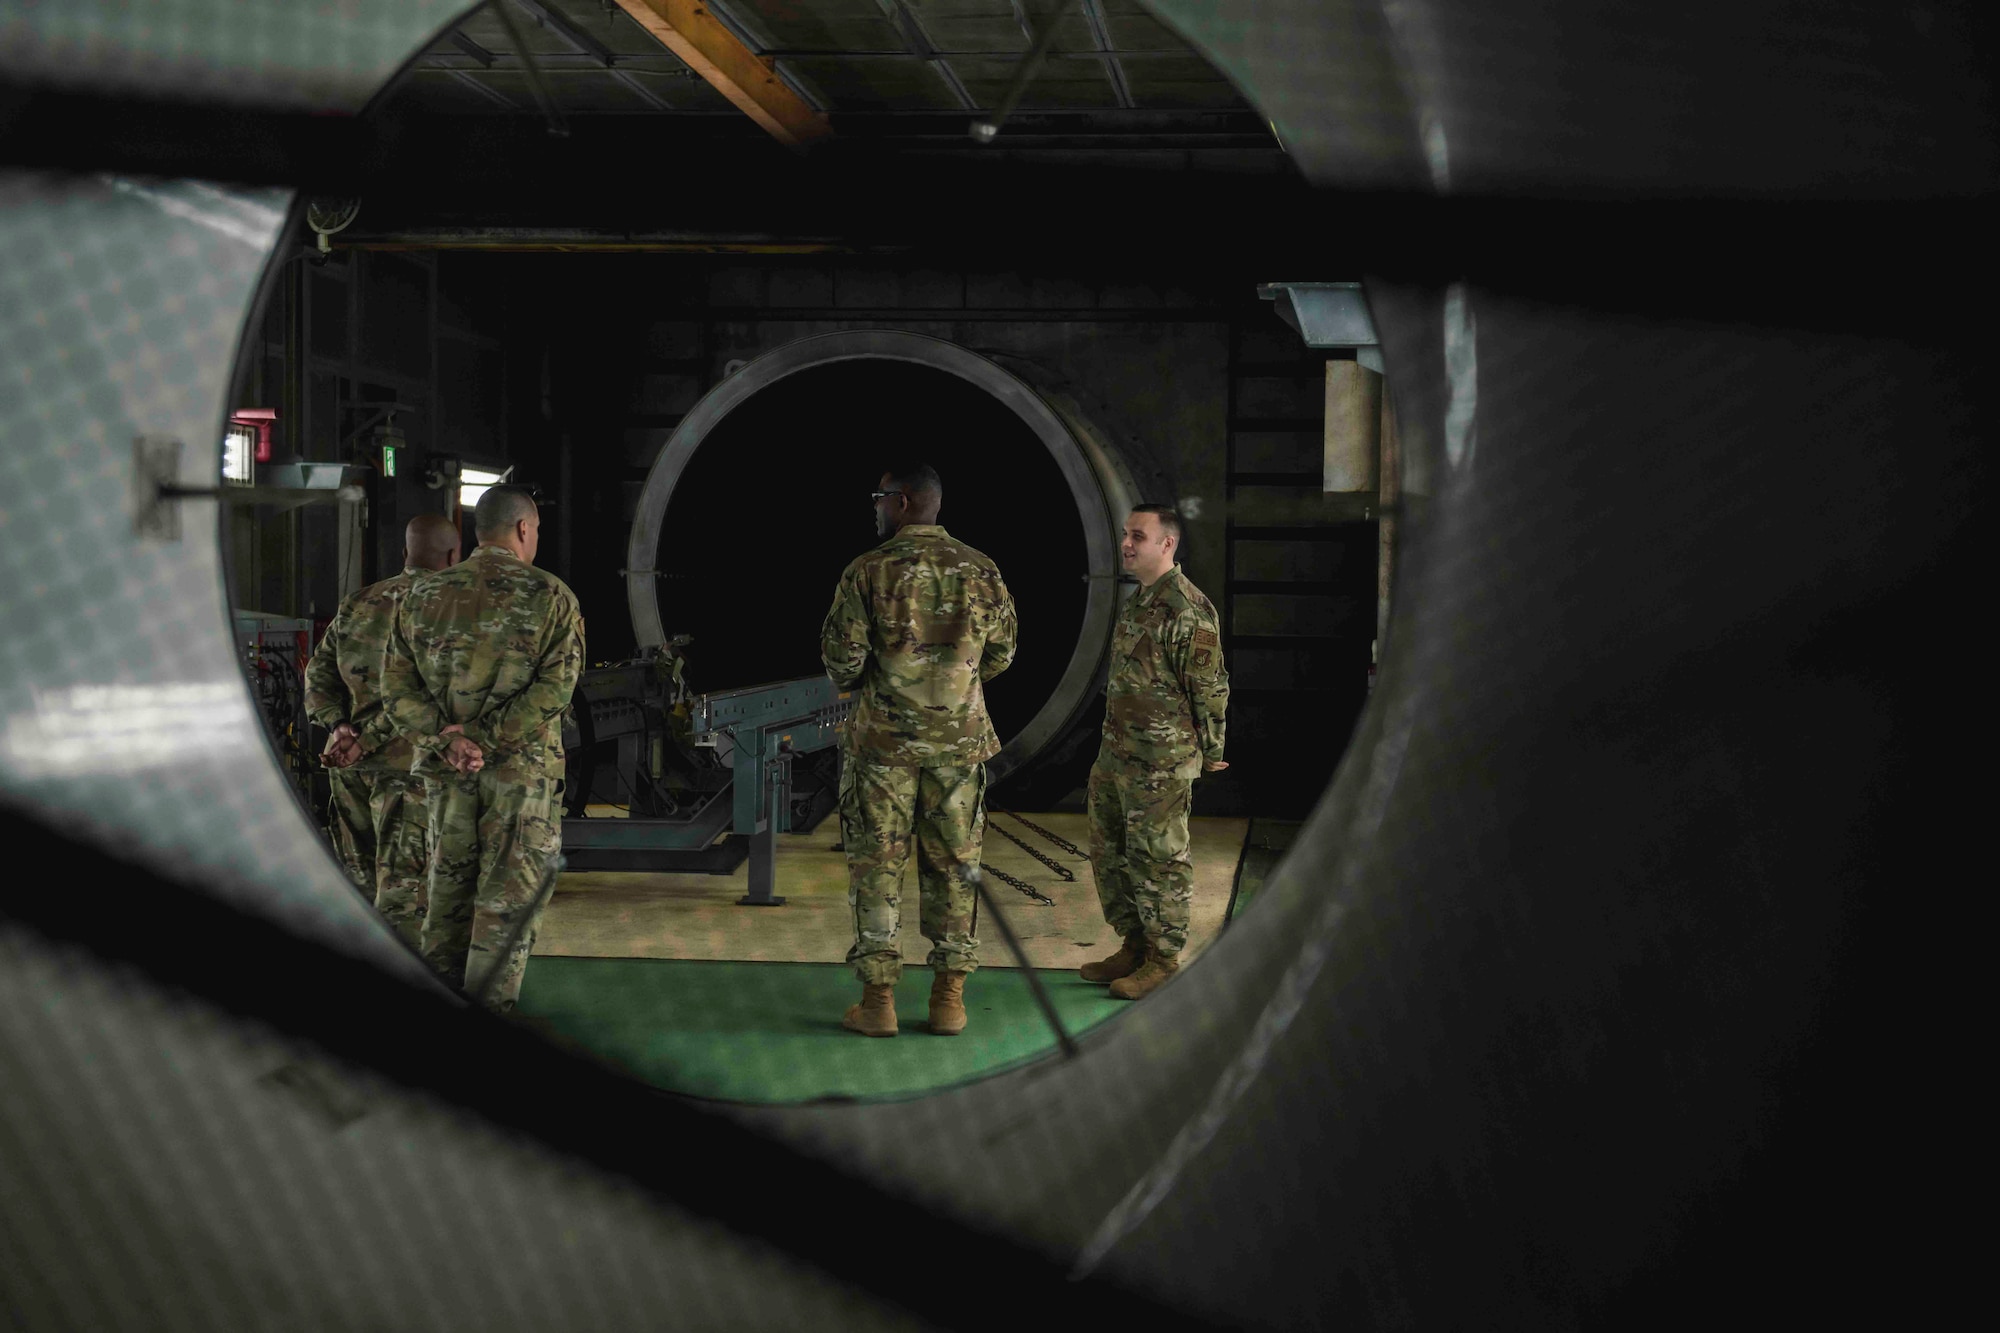 U.S. Air Force Chief Master Sgt. Wendell J. Snider, second from the right, U.S. Forces Japan Senior Enlisted Leader, speaks with Airmen from the 18th Component Maintenance Squadron about the engine test cell